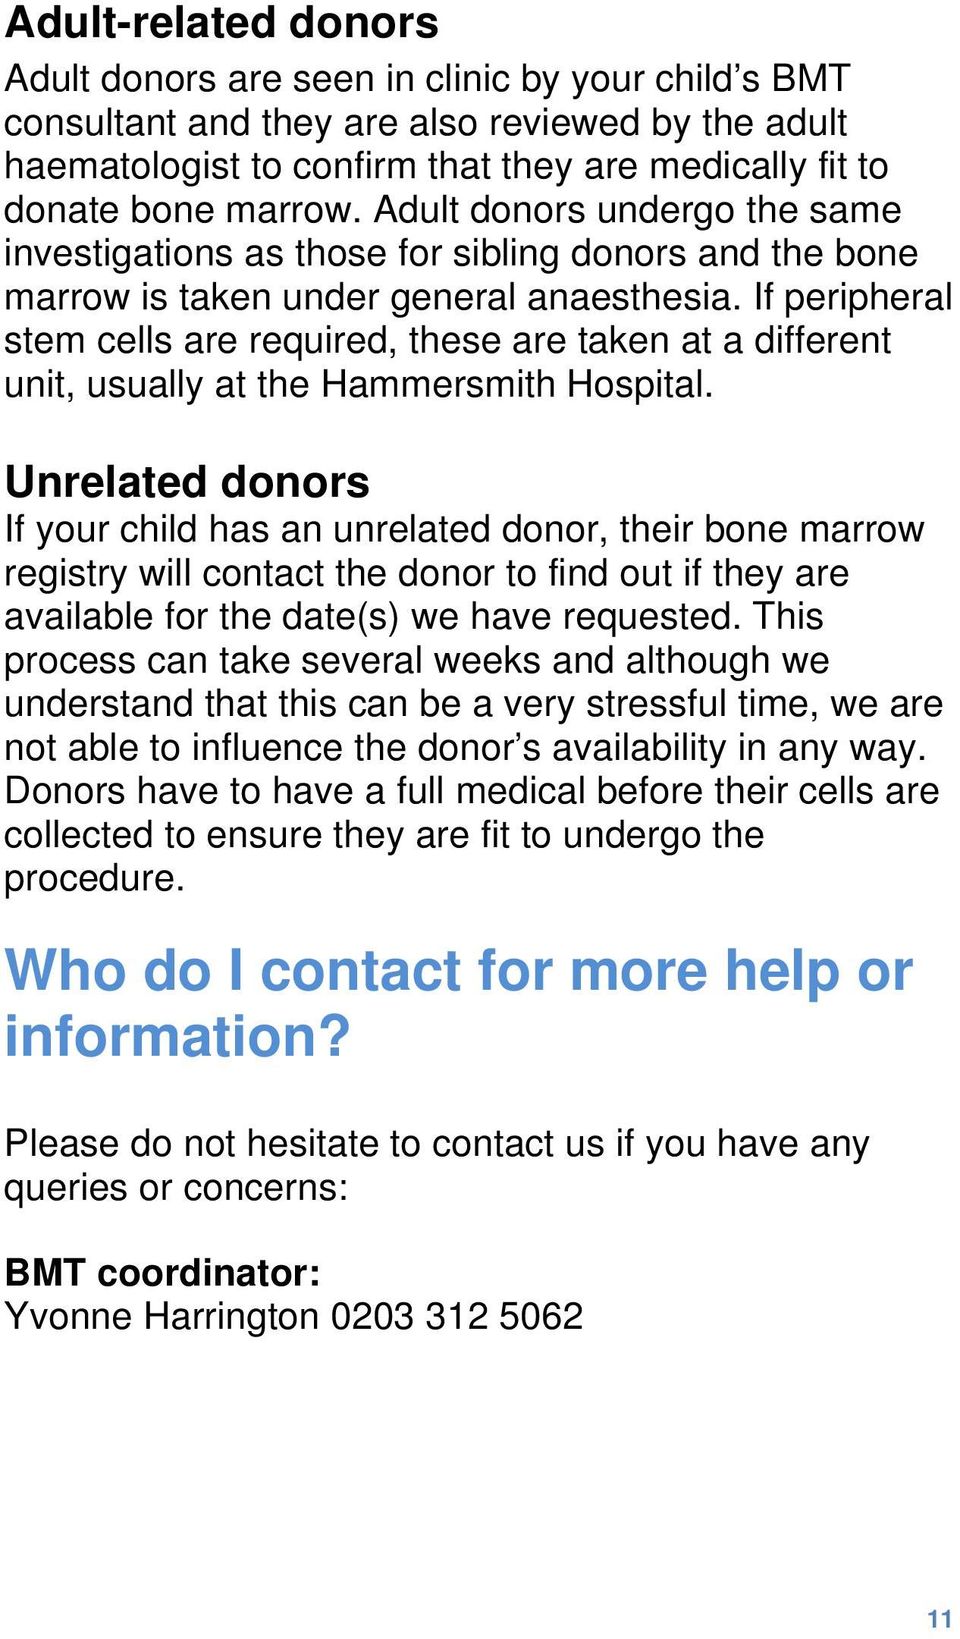 If peripheral stem cells are required, these are taken at a different unit, usually at the Hammersmith Hospital.